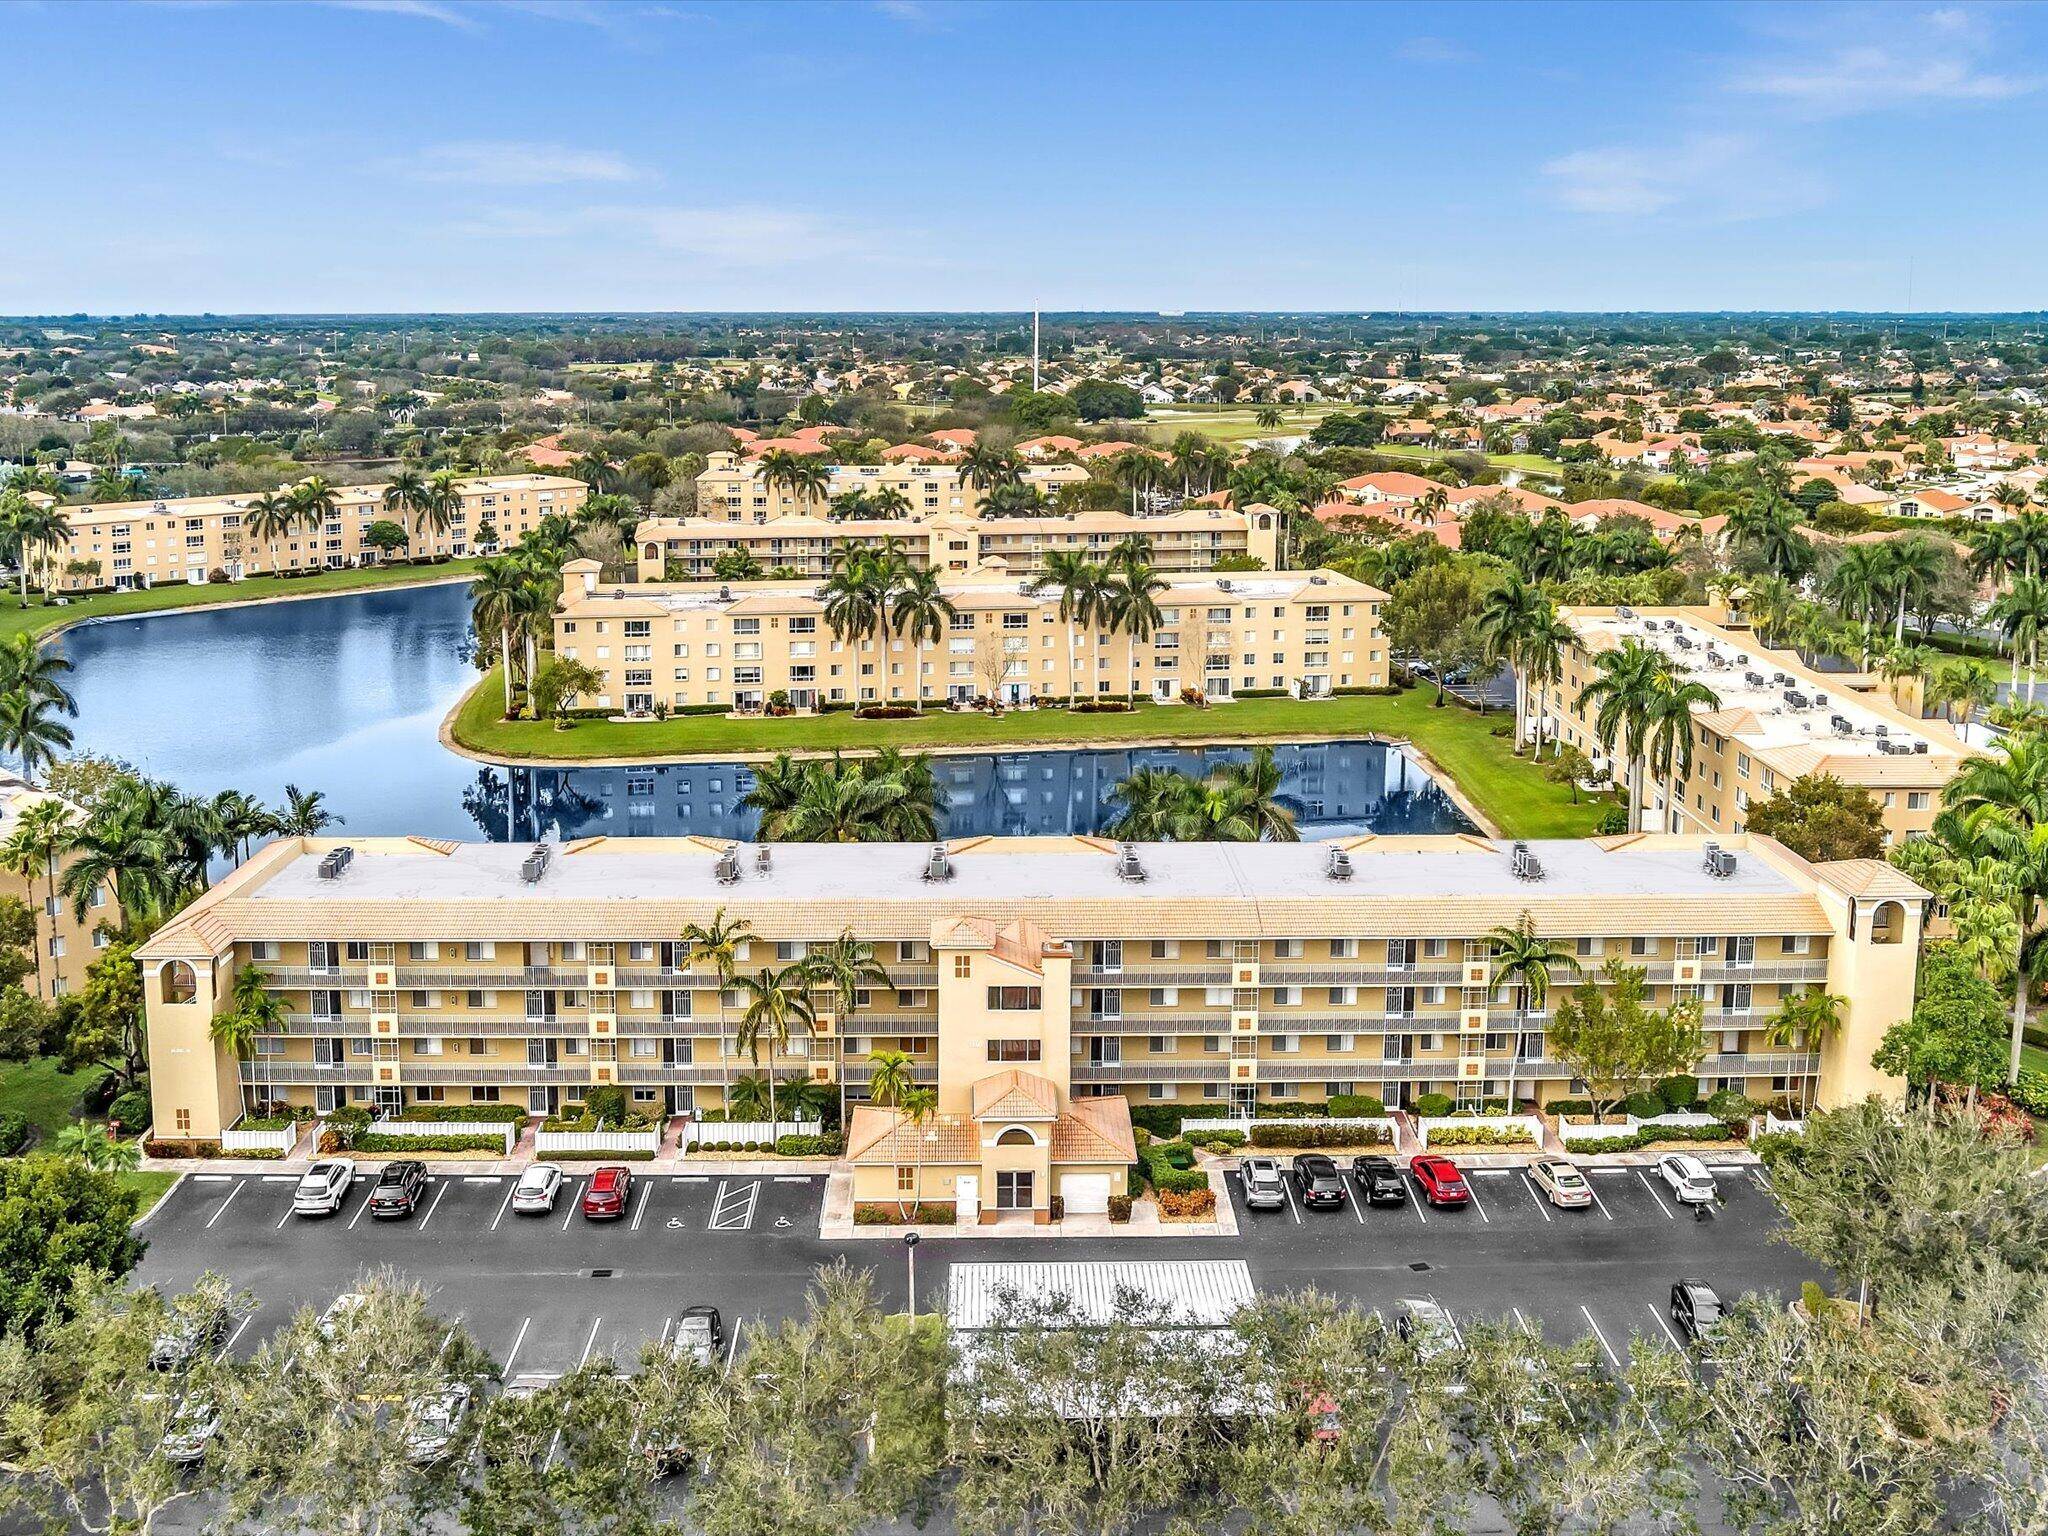 This 3 2 lakeview condominium is located within a gated enclave at Coral Lakes.